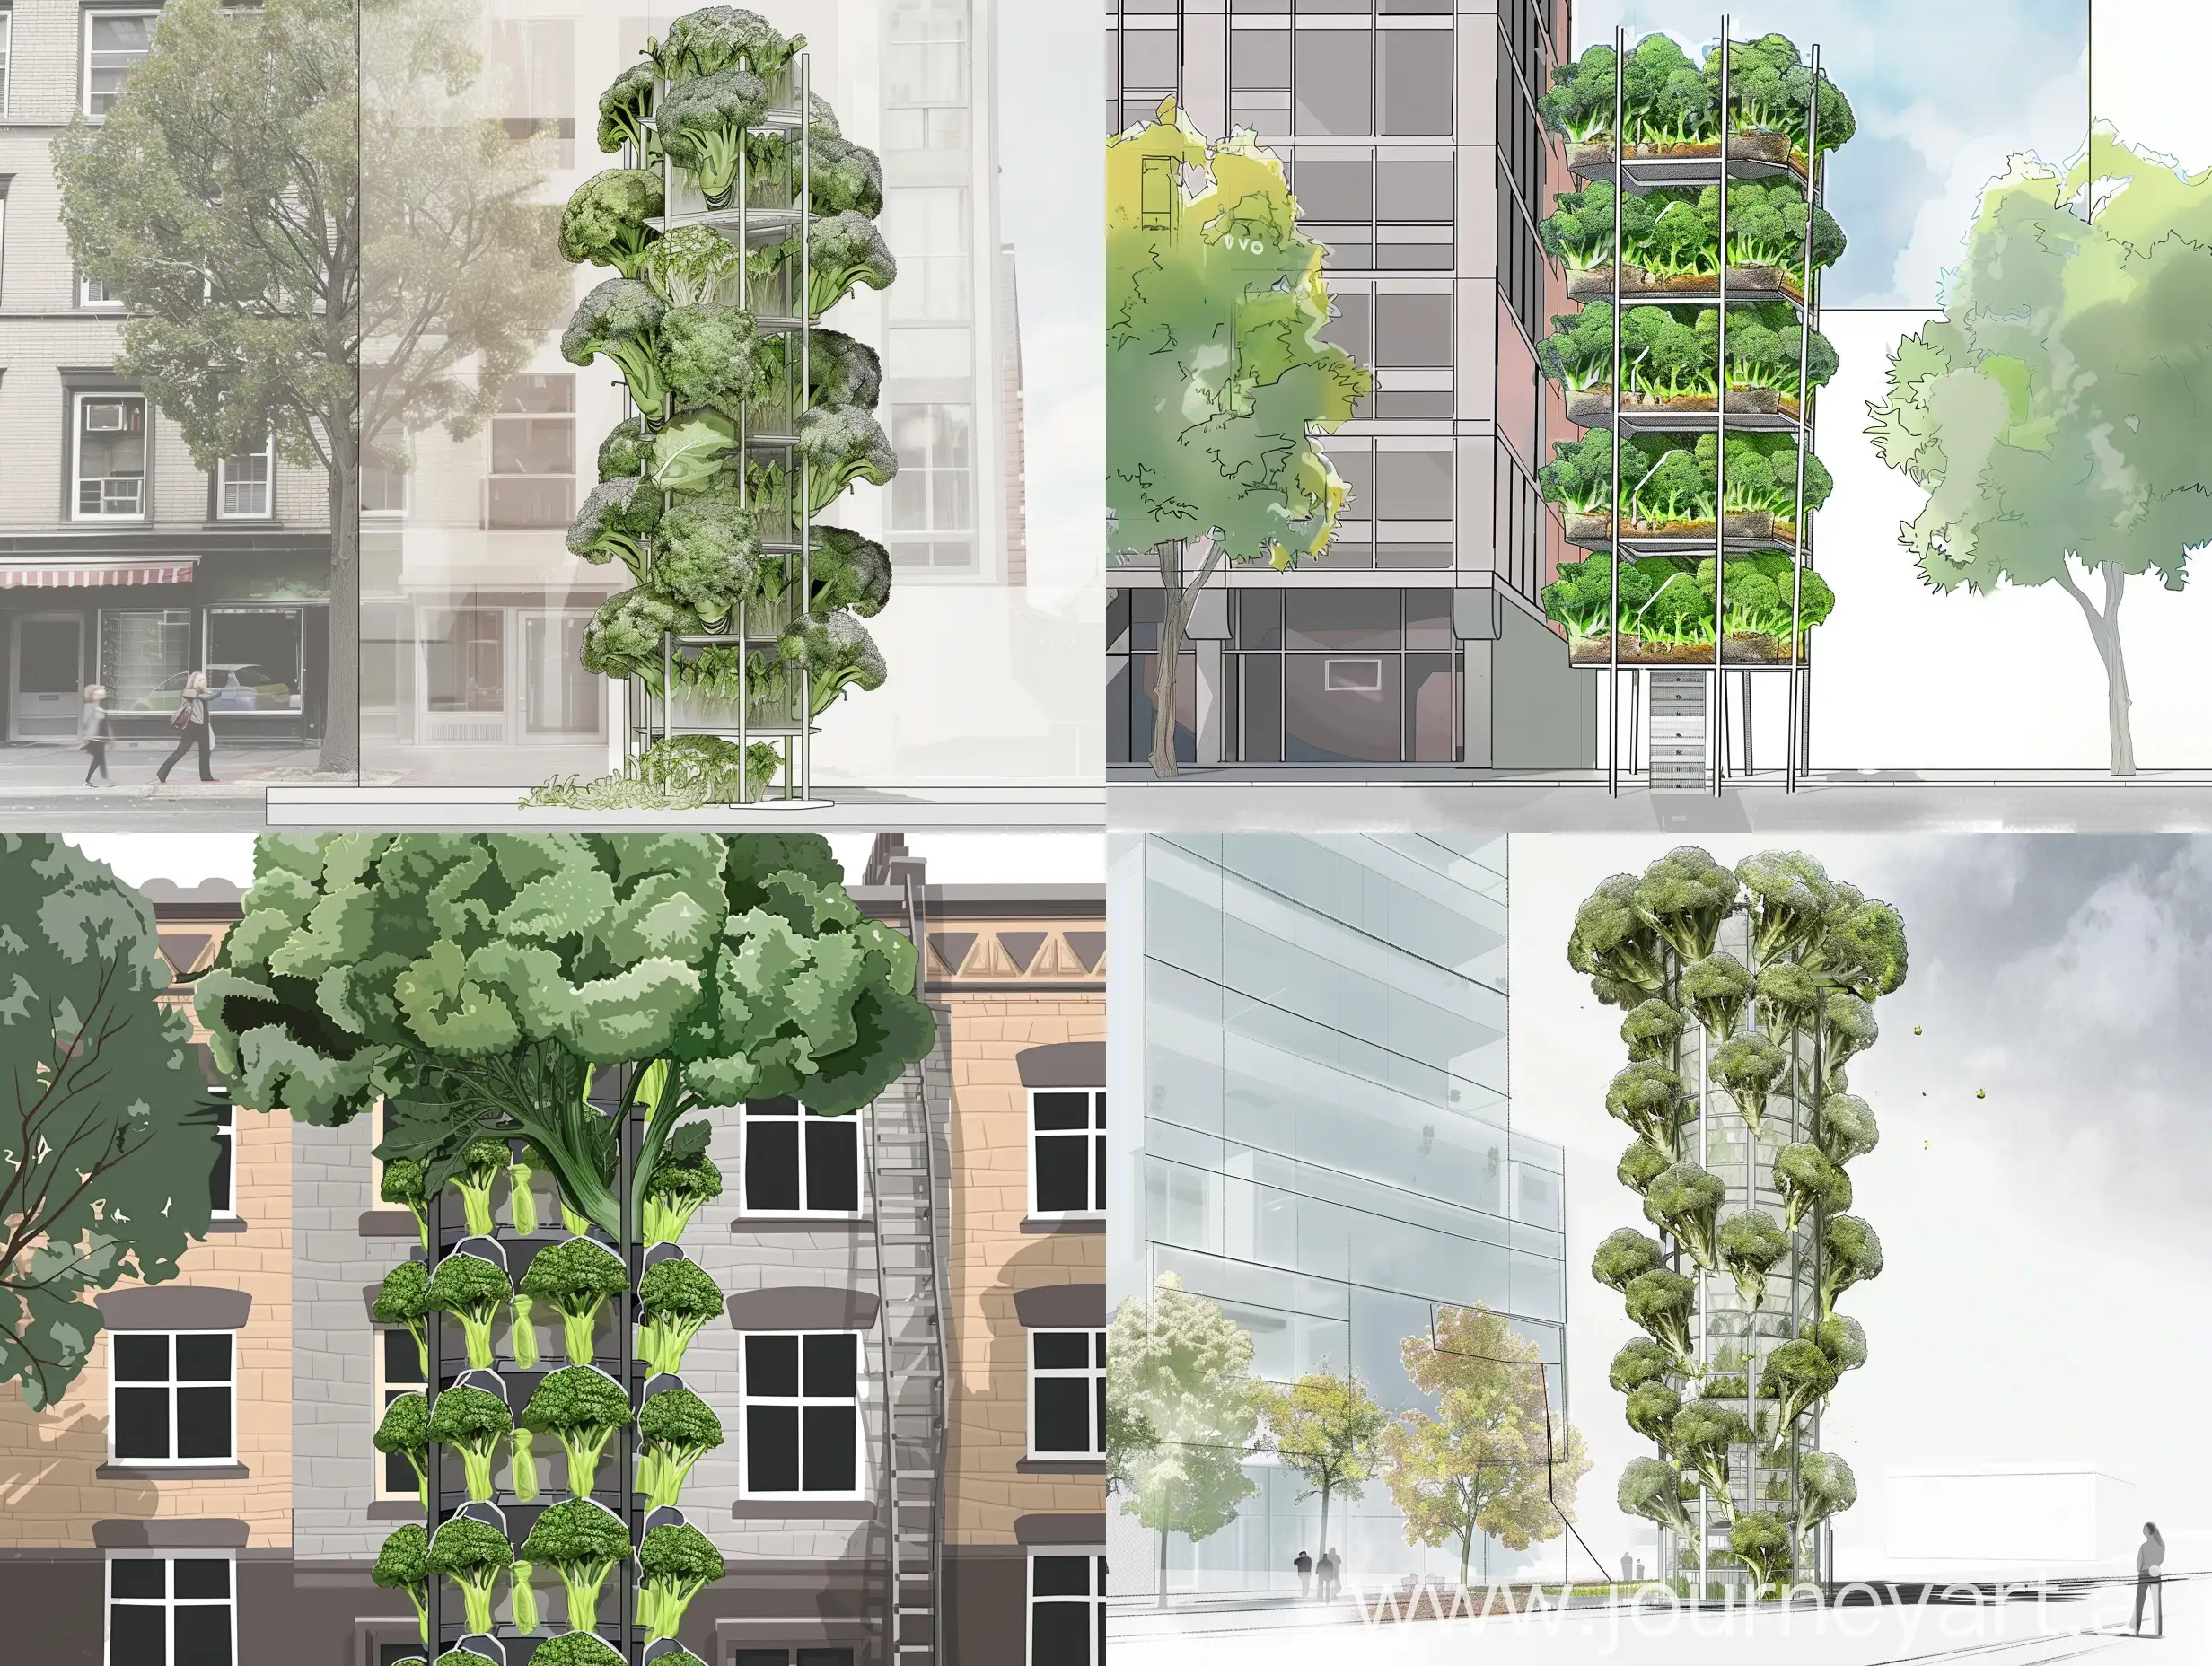 Urban-Vertical-Hydroponic-Tower-Growing-Broccoli-and-Coleslaw-on-Building-Facade